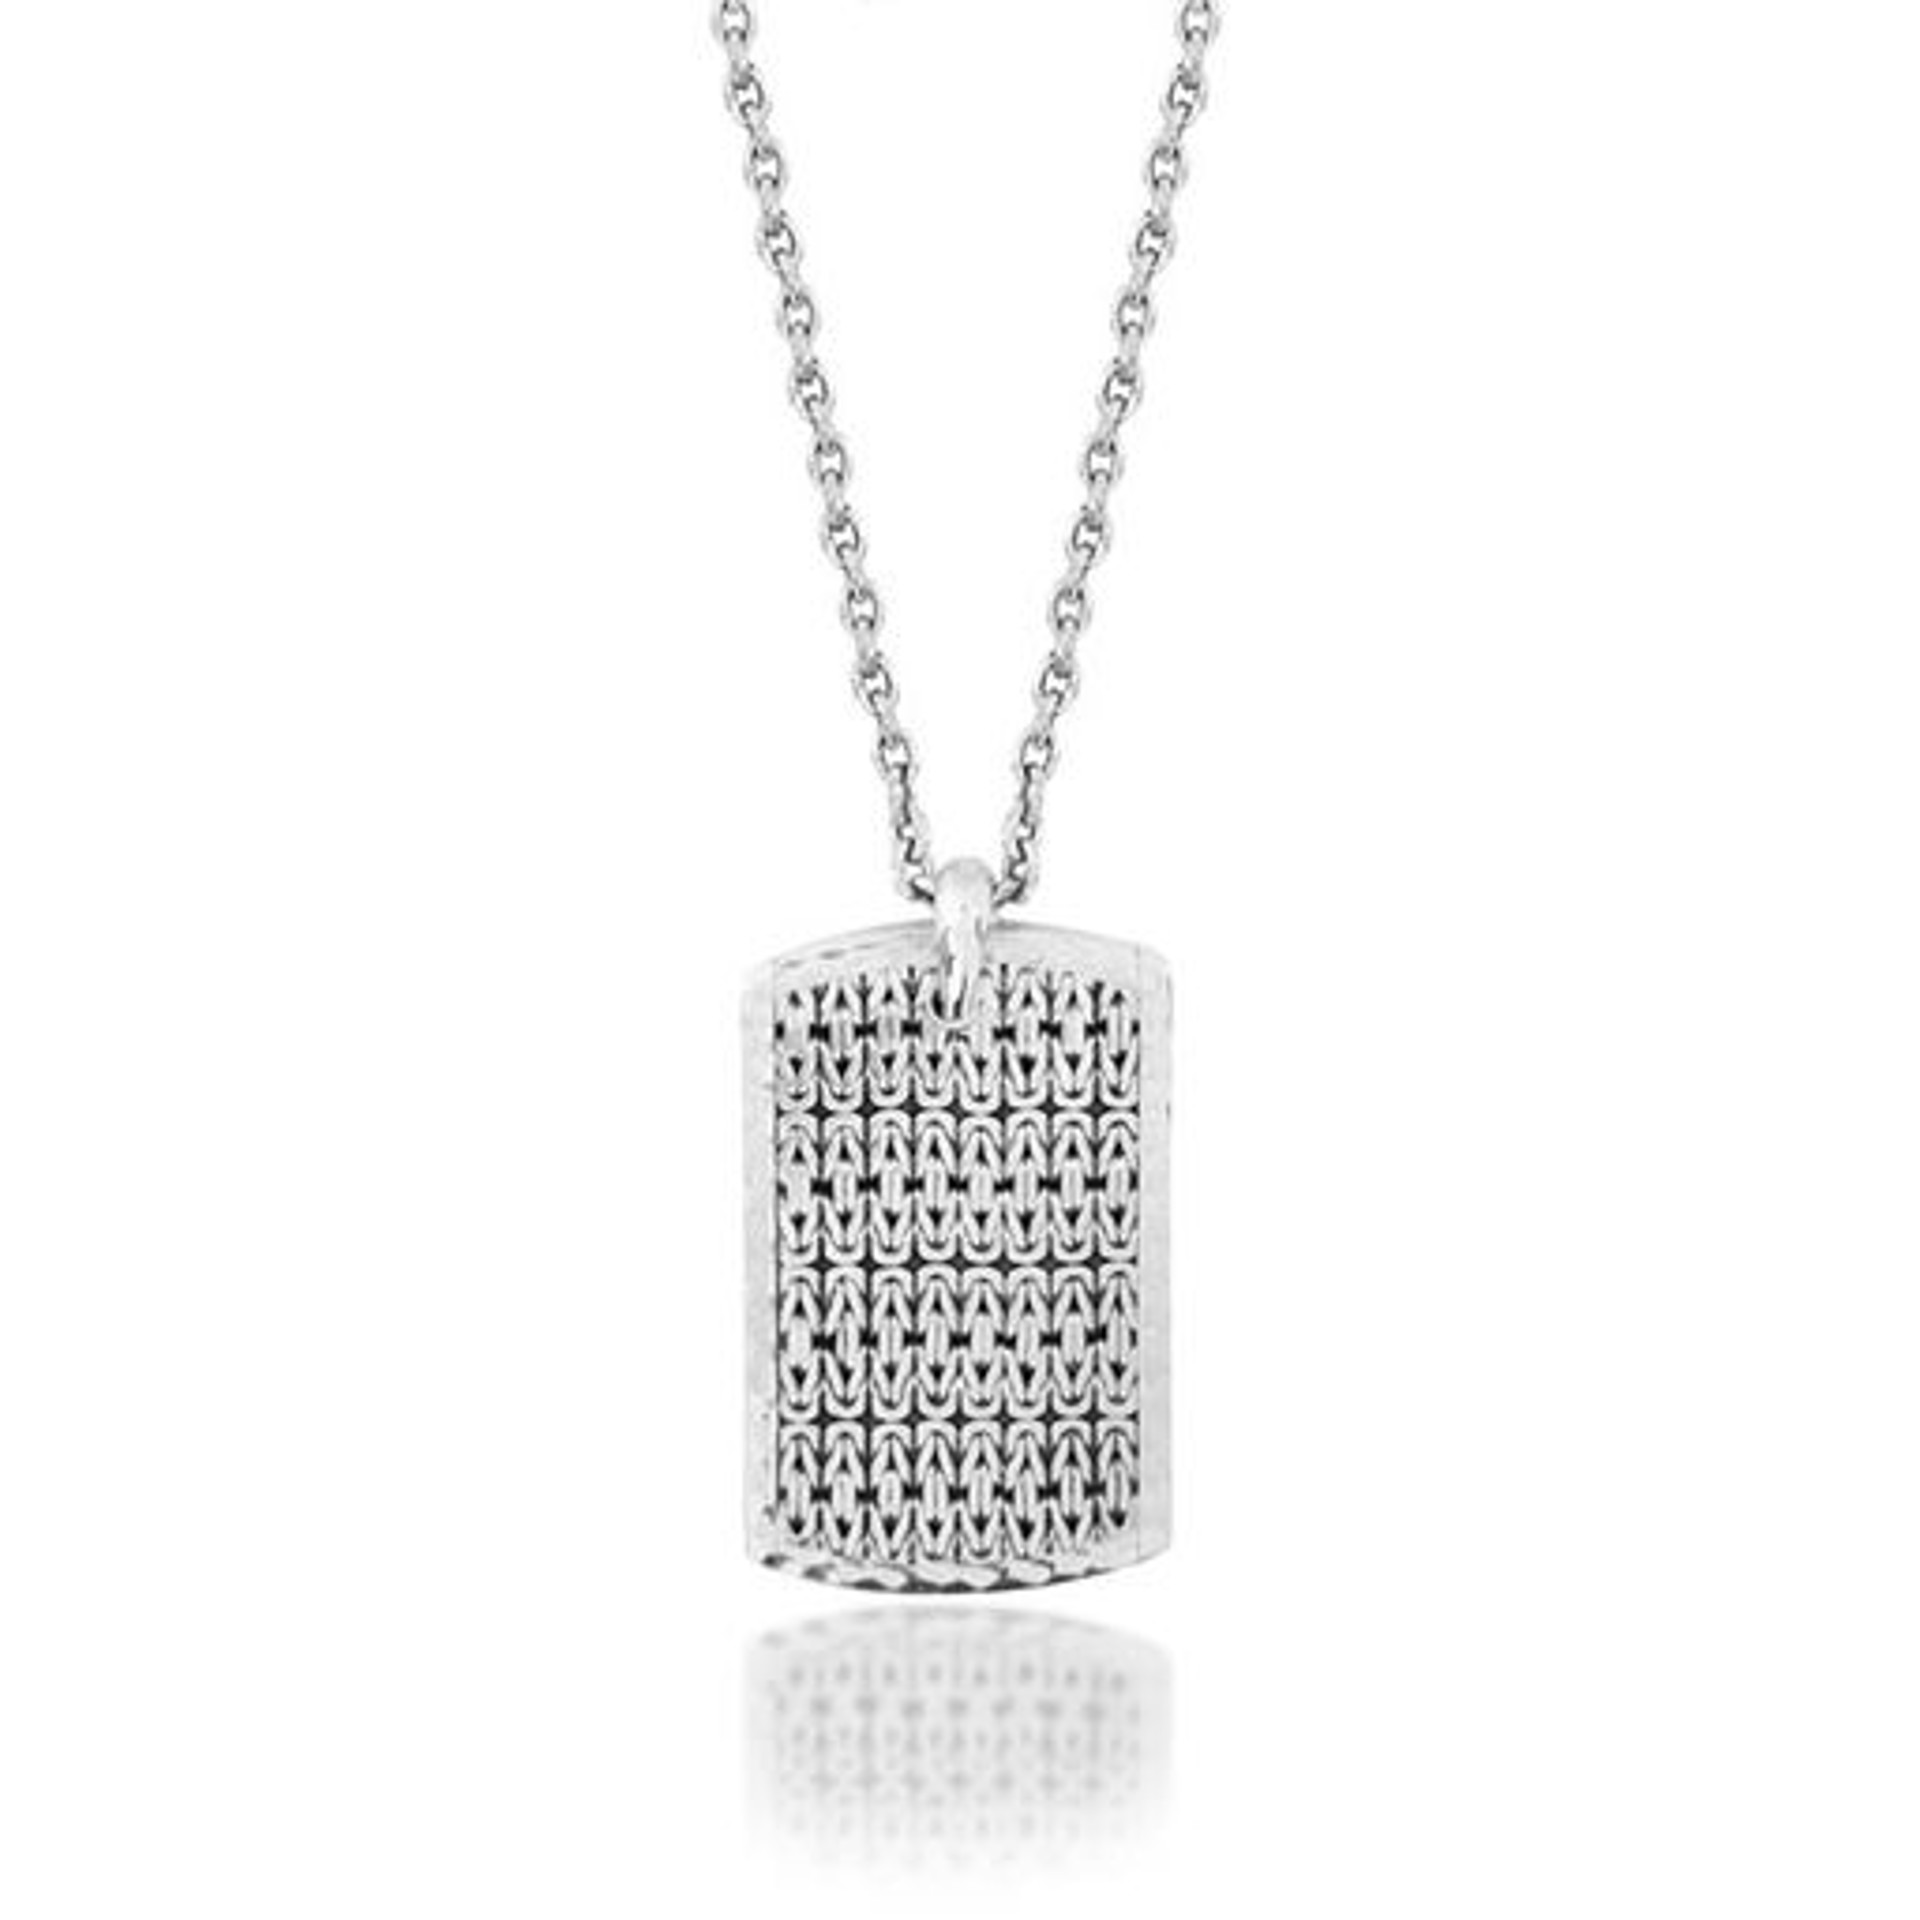 7021 Dog Tag Men's Reversable Weave Rectangle Silver Necklace by Lois Hill